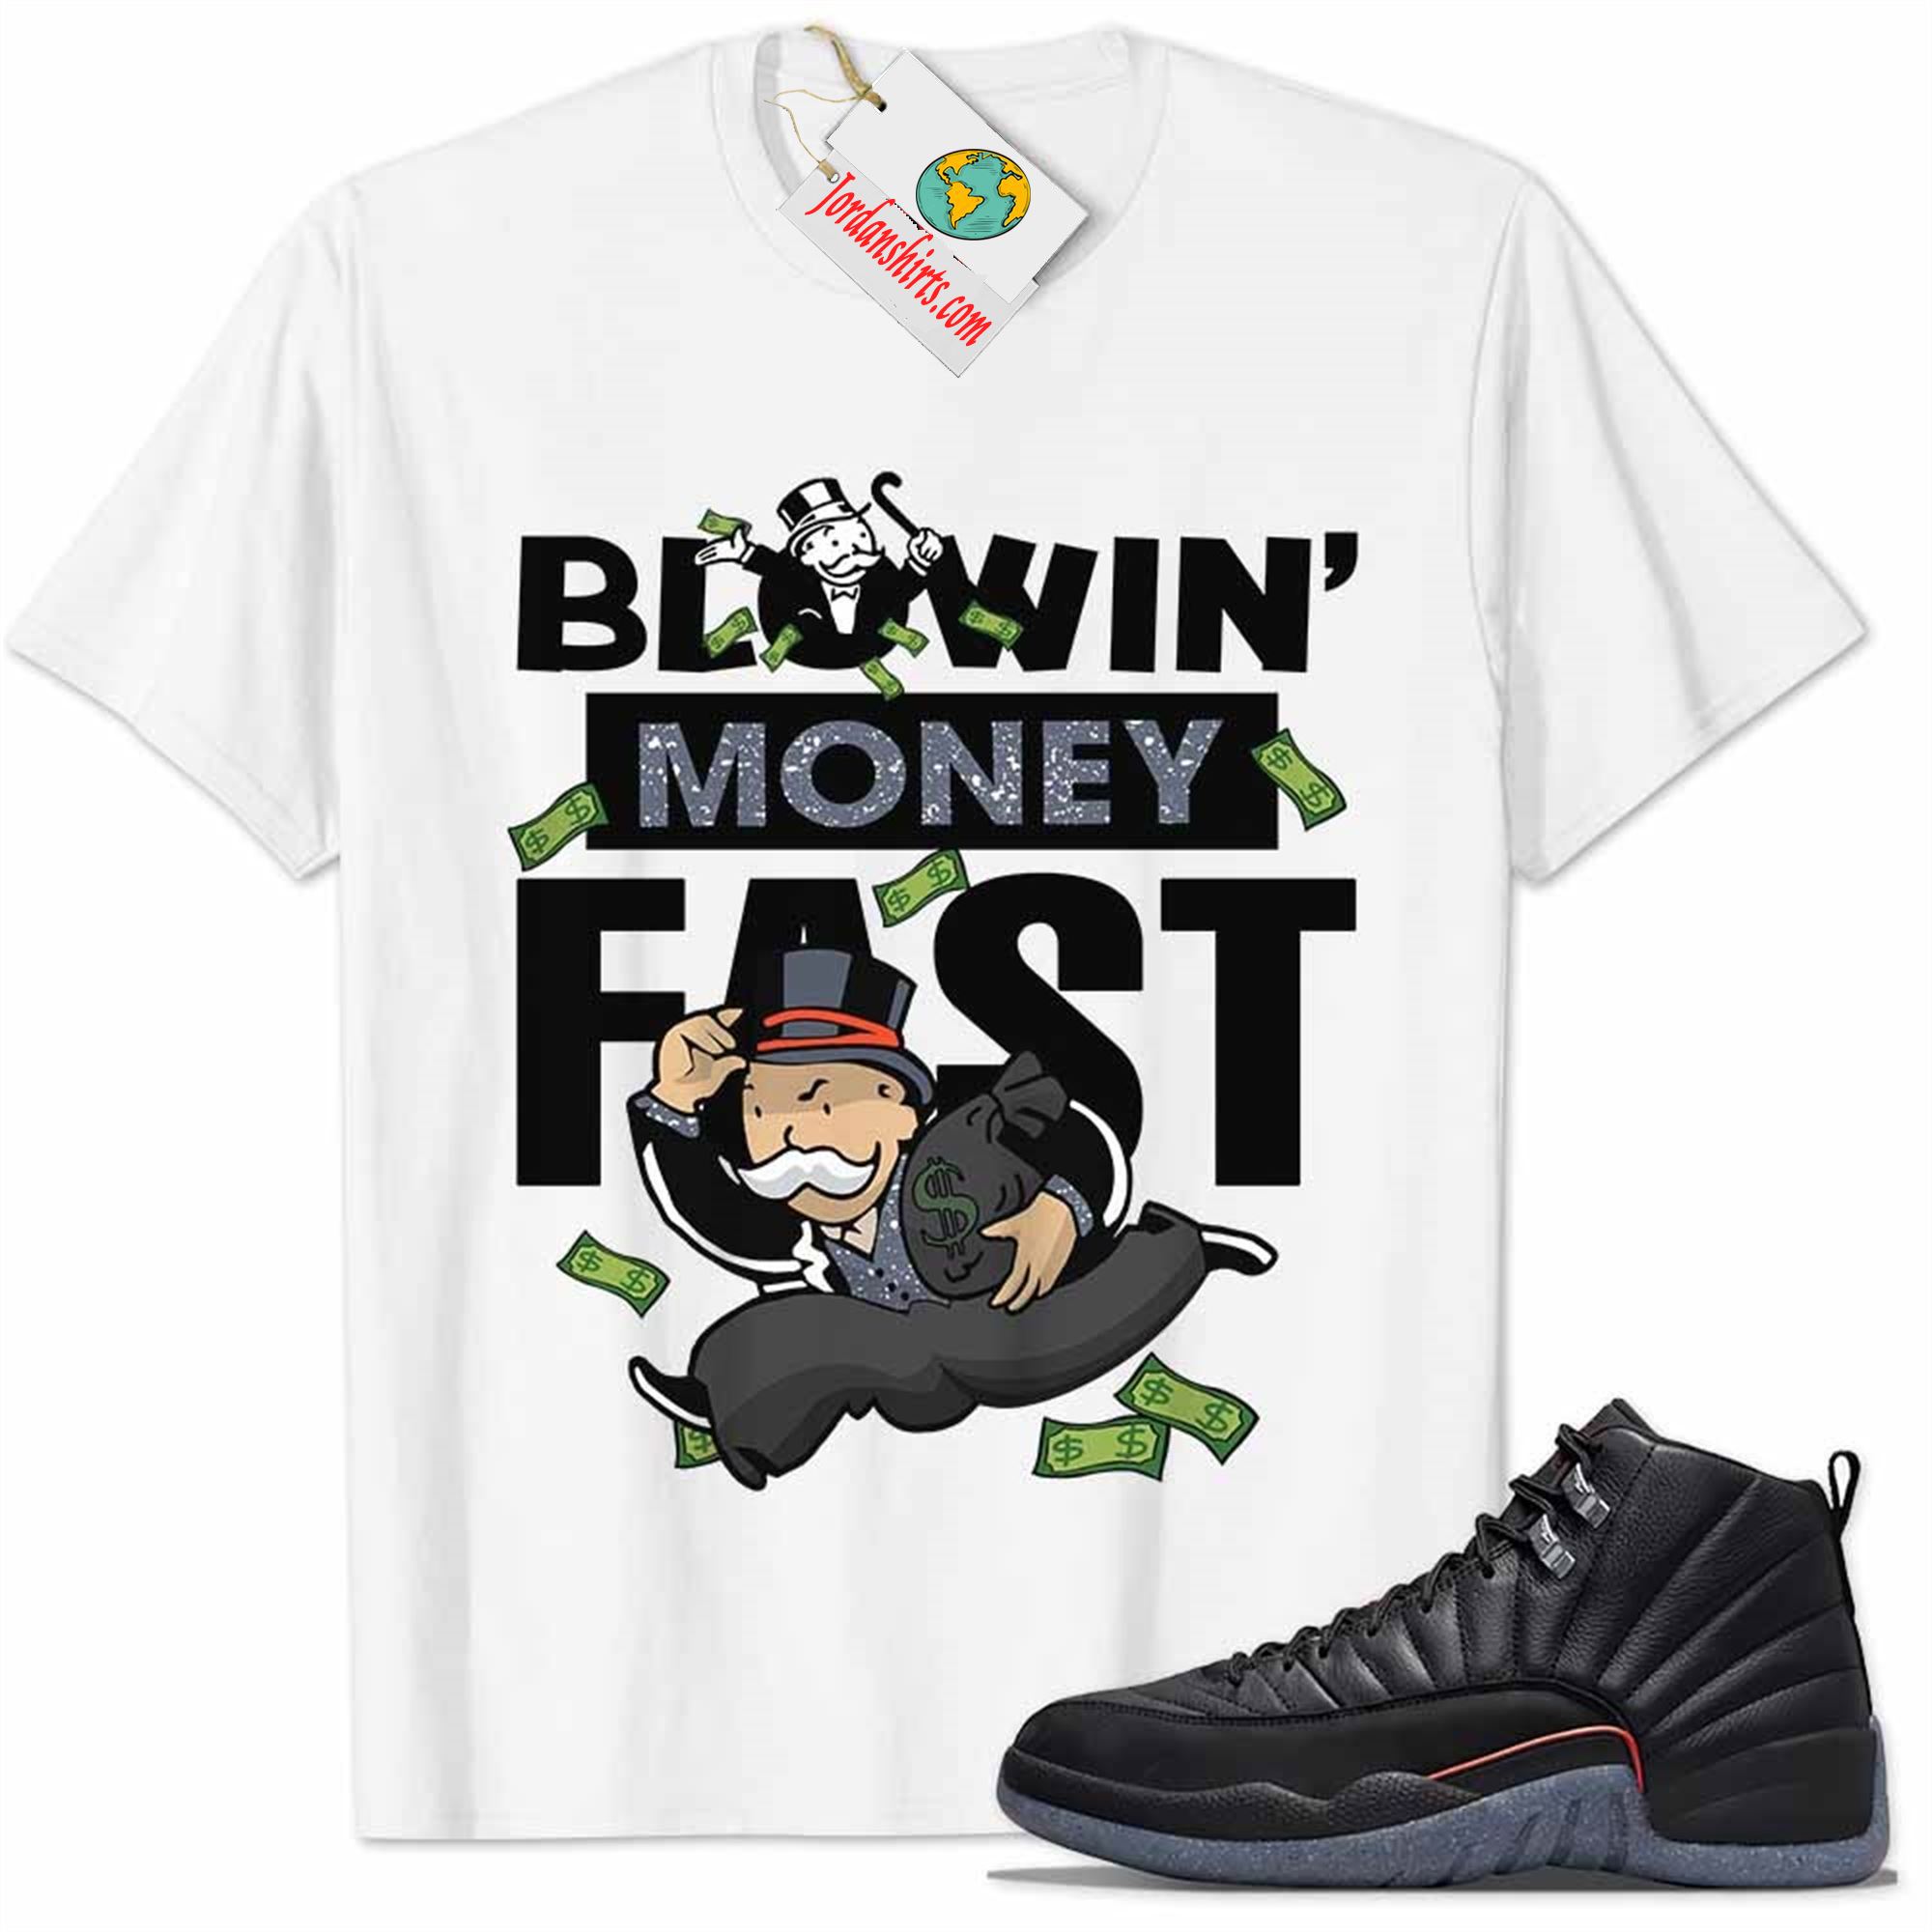 Jordan 12 Shirt, Utility Grind 12s Shirt Blowin Money Fast Mr Monopoly White Full Size Up To 5xl